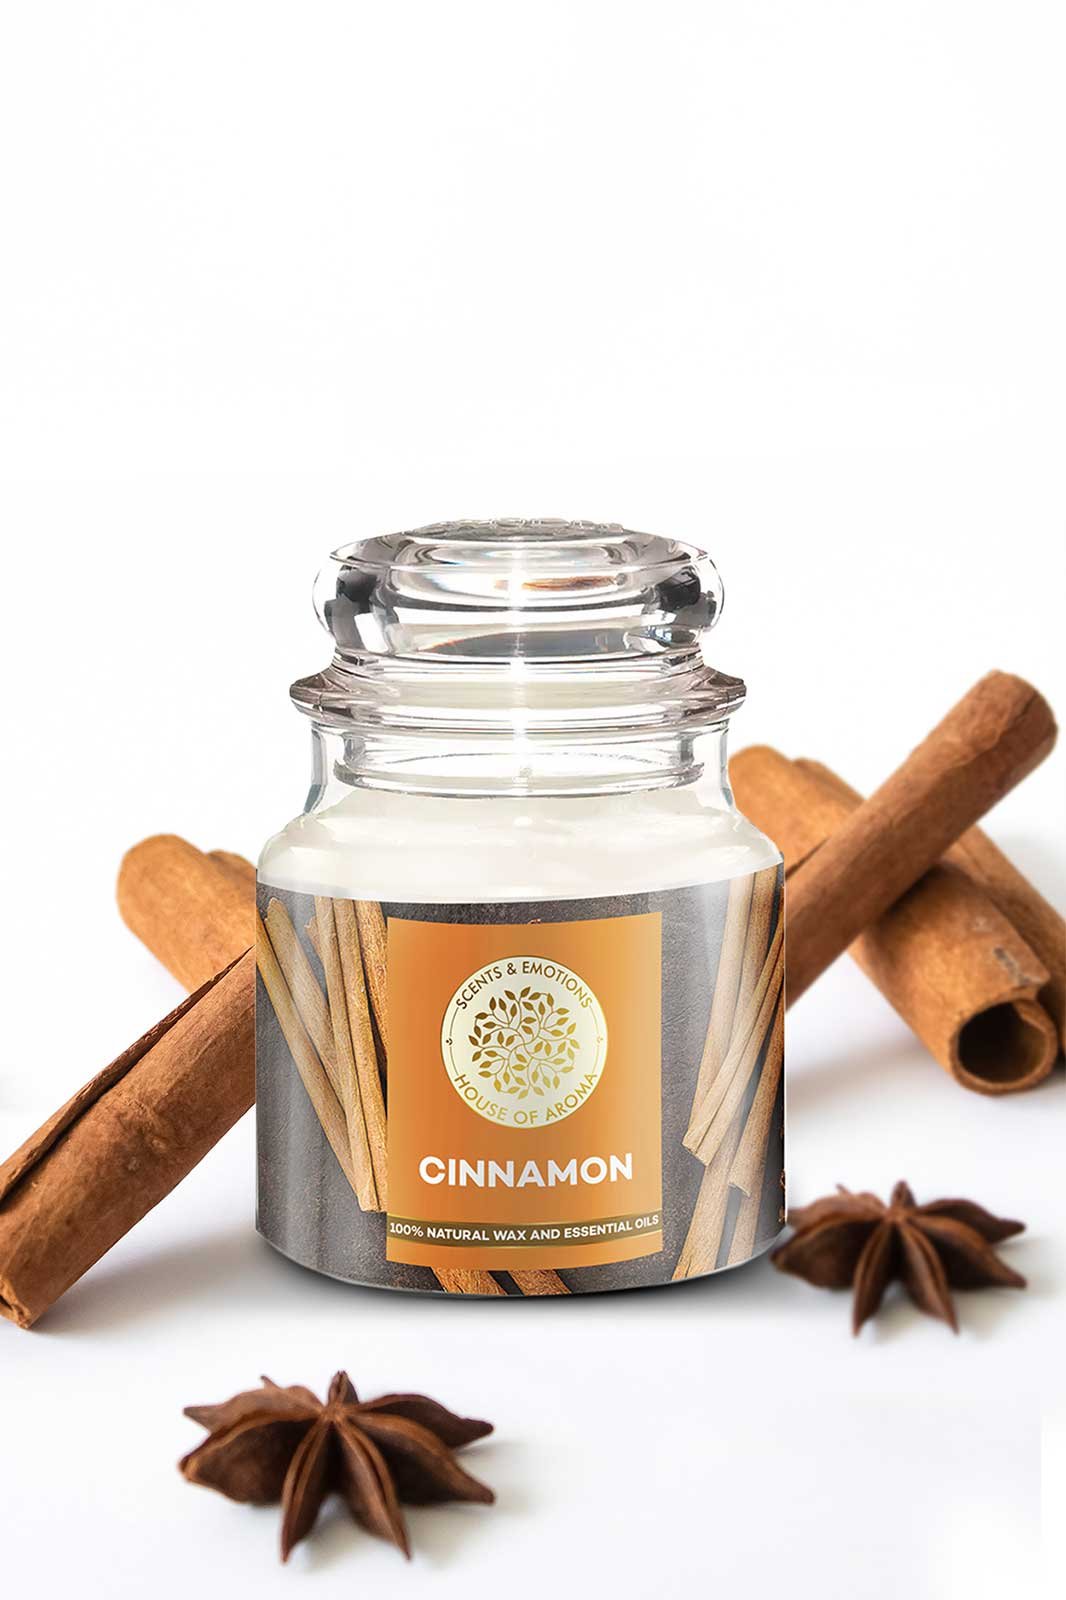 Cinnamon Natural Scented Candle, Cinnamon aromatherapy candle, Essential oil candles, beeswax candles, Cinnamon candle fragrance, cinnamon essential oil candles, House of Aroma